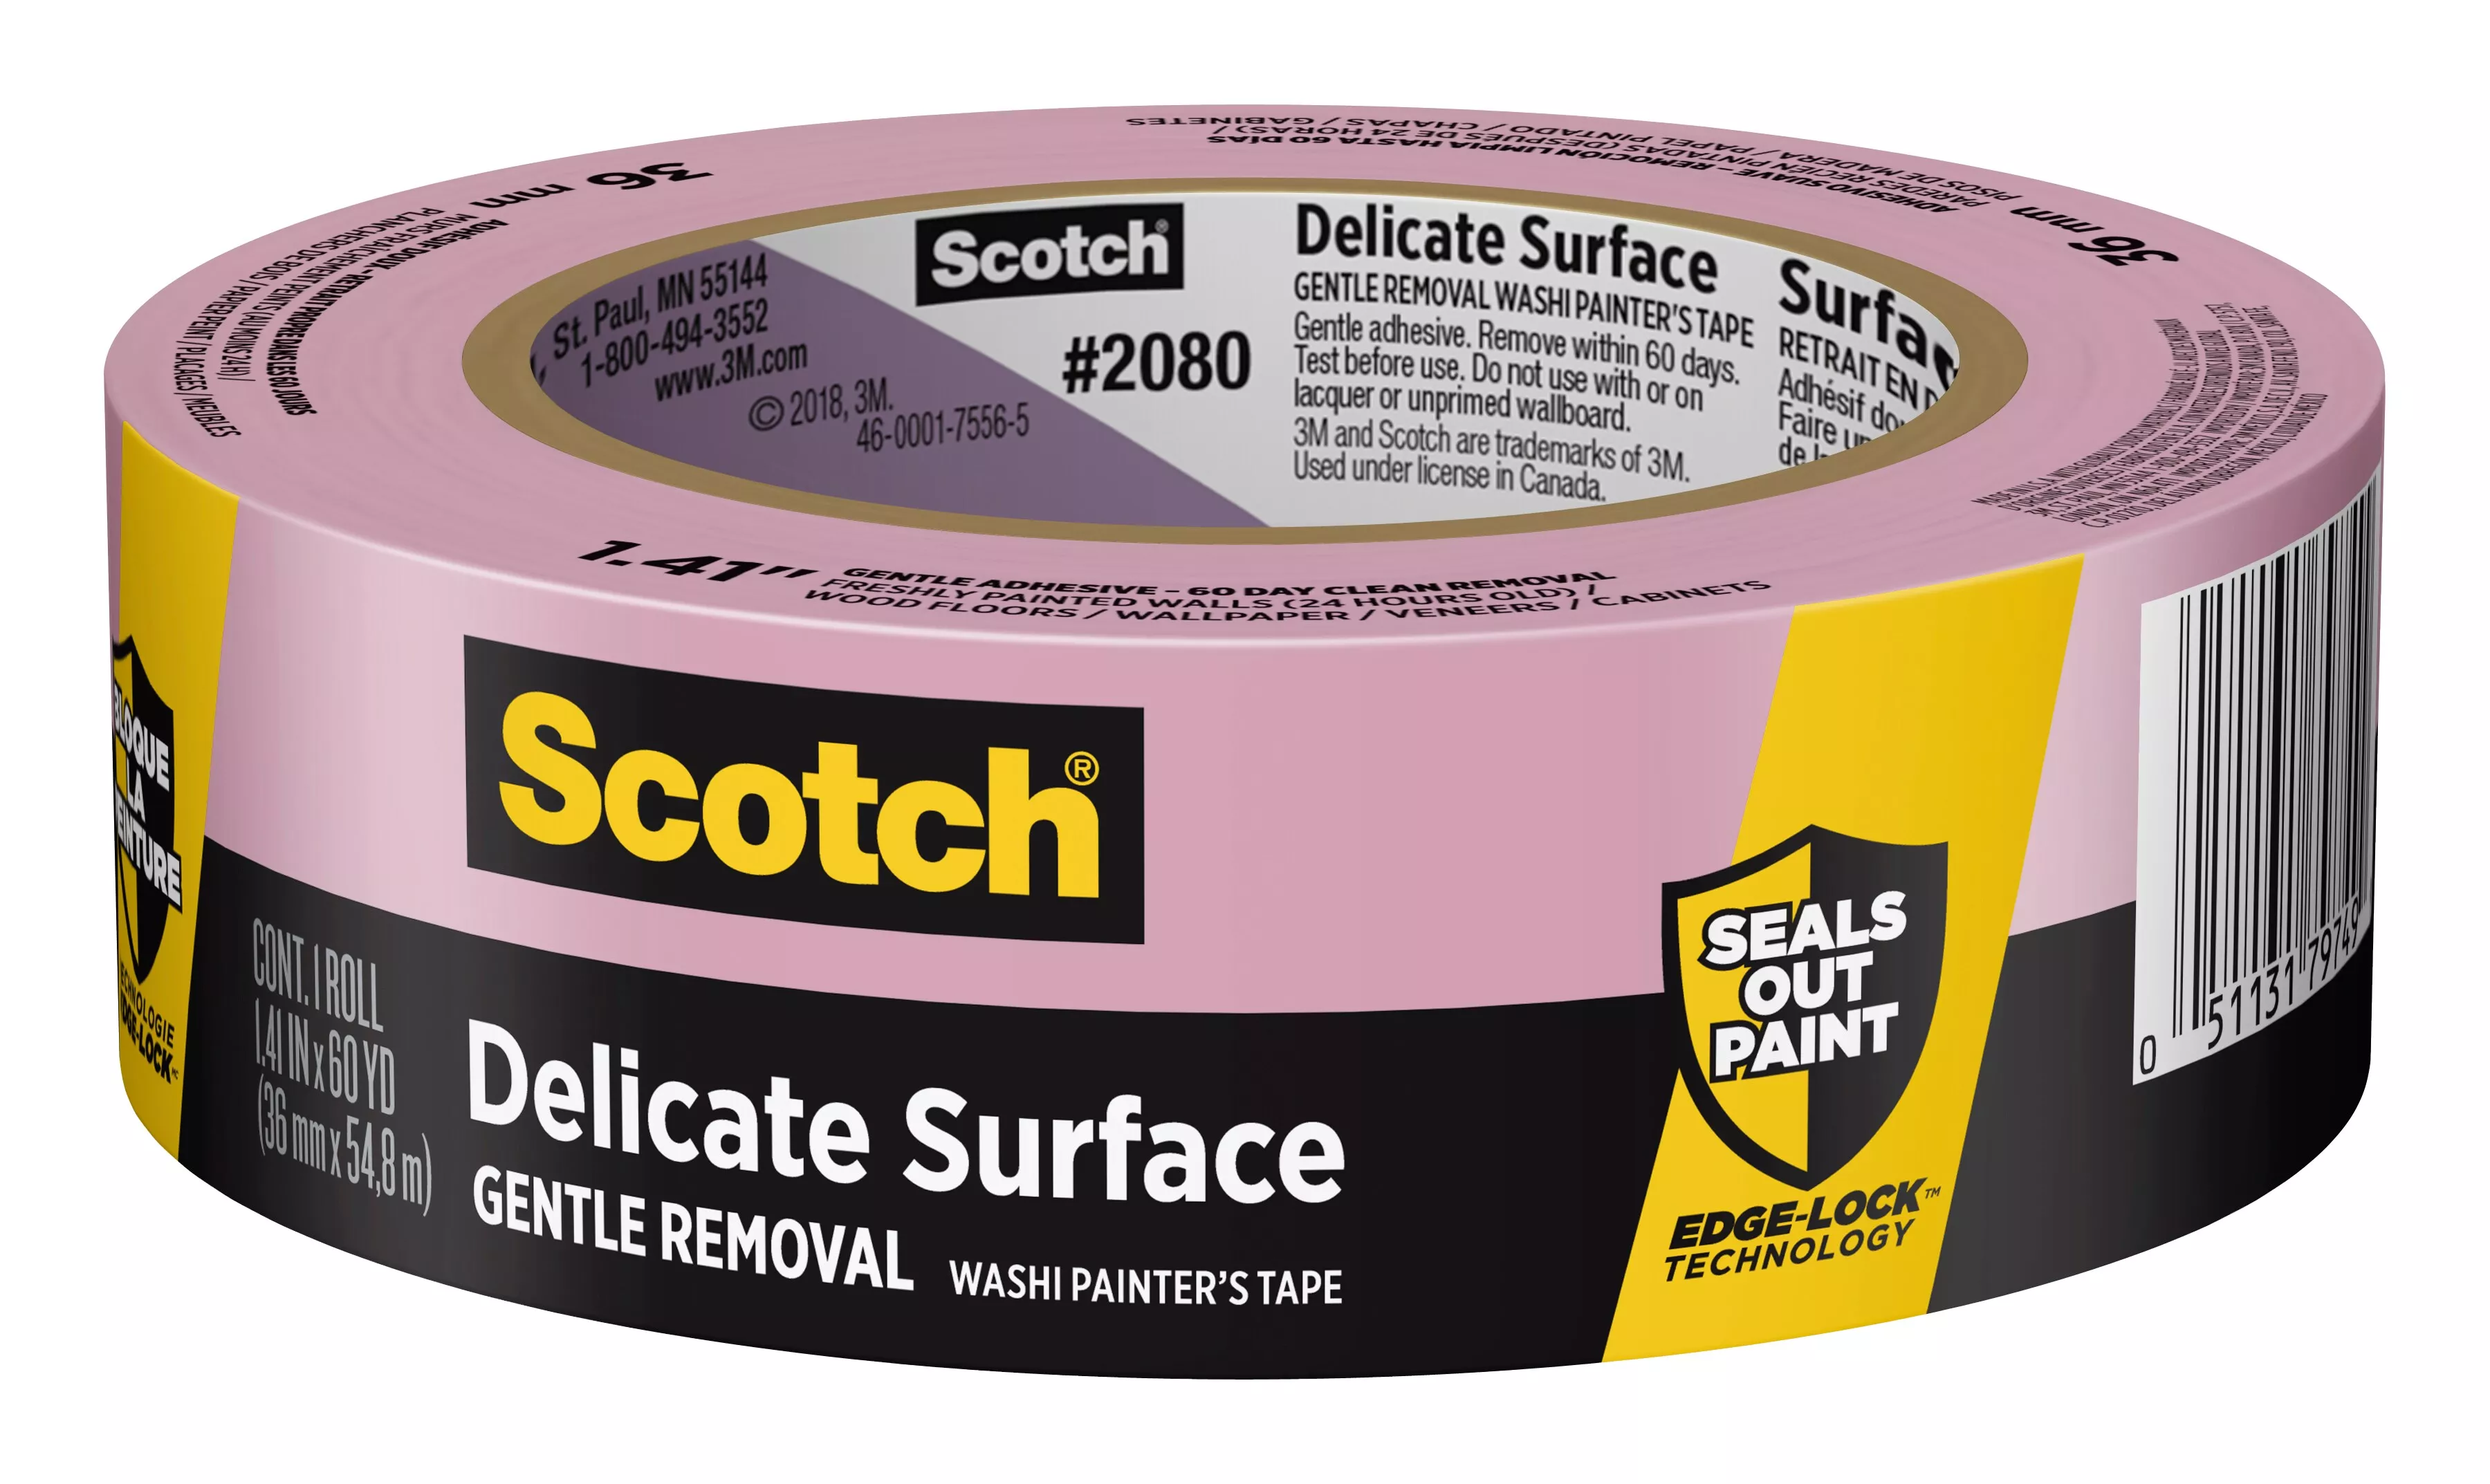 Scotch® Delicate Surface Painter's Tape 2080-36EC, 1.41 in x 60 yd (36mm
x 54,8m)